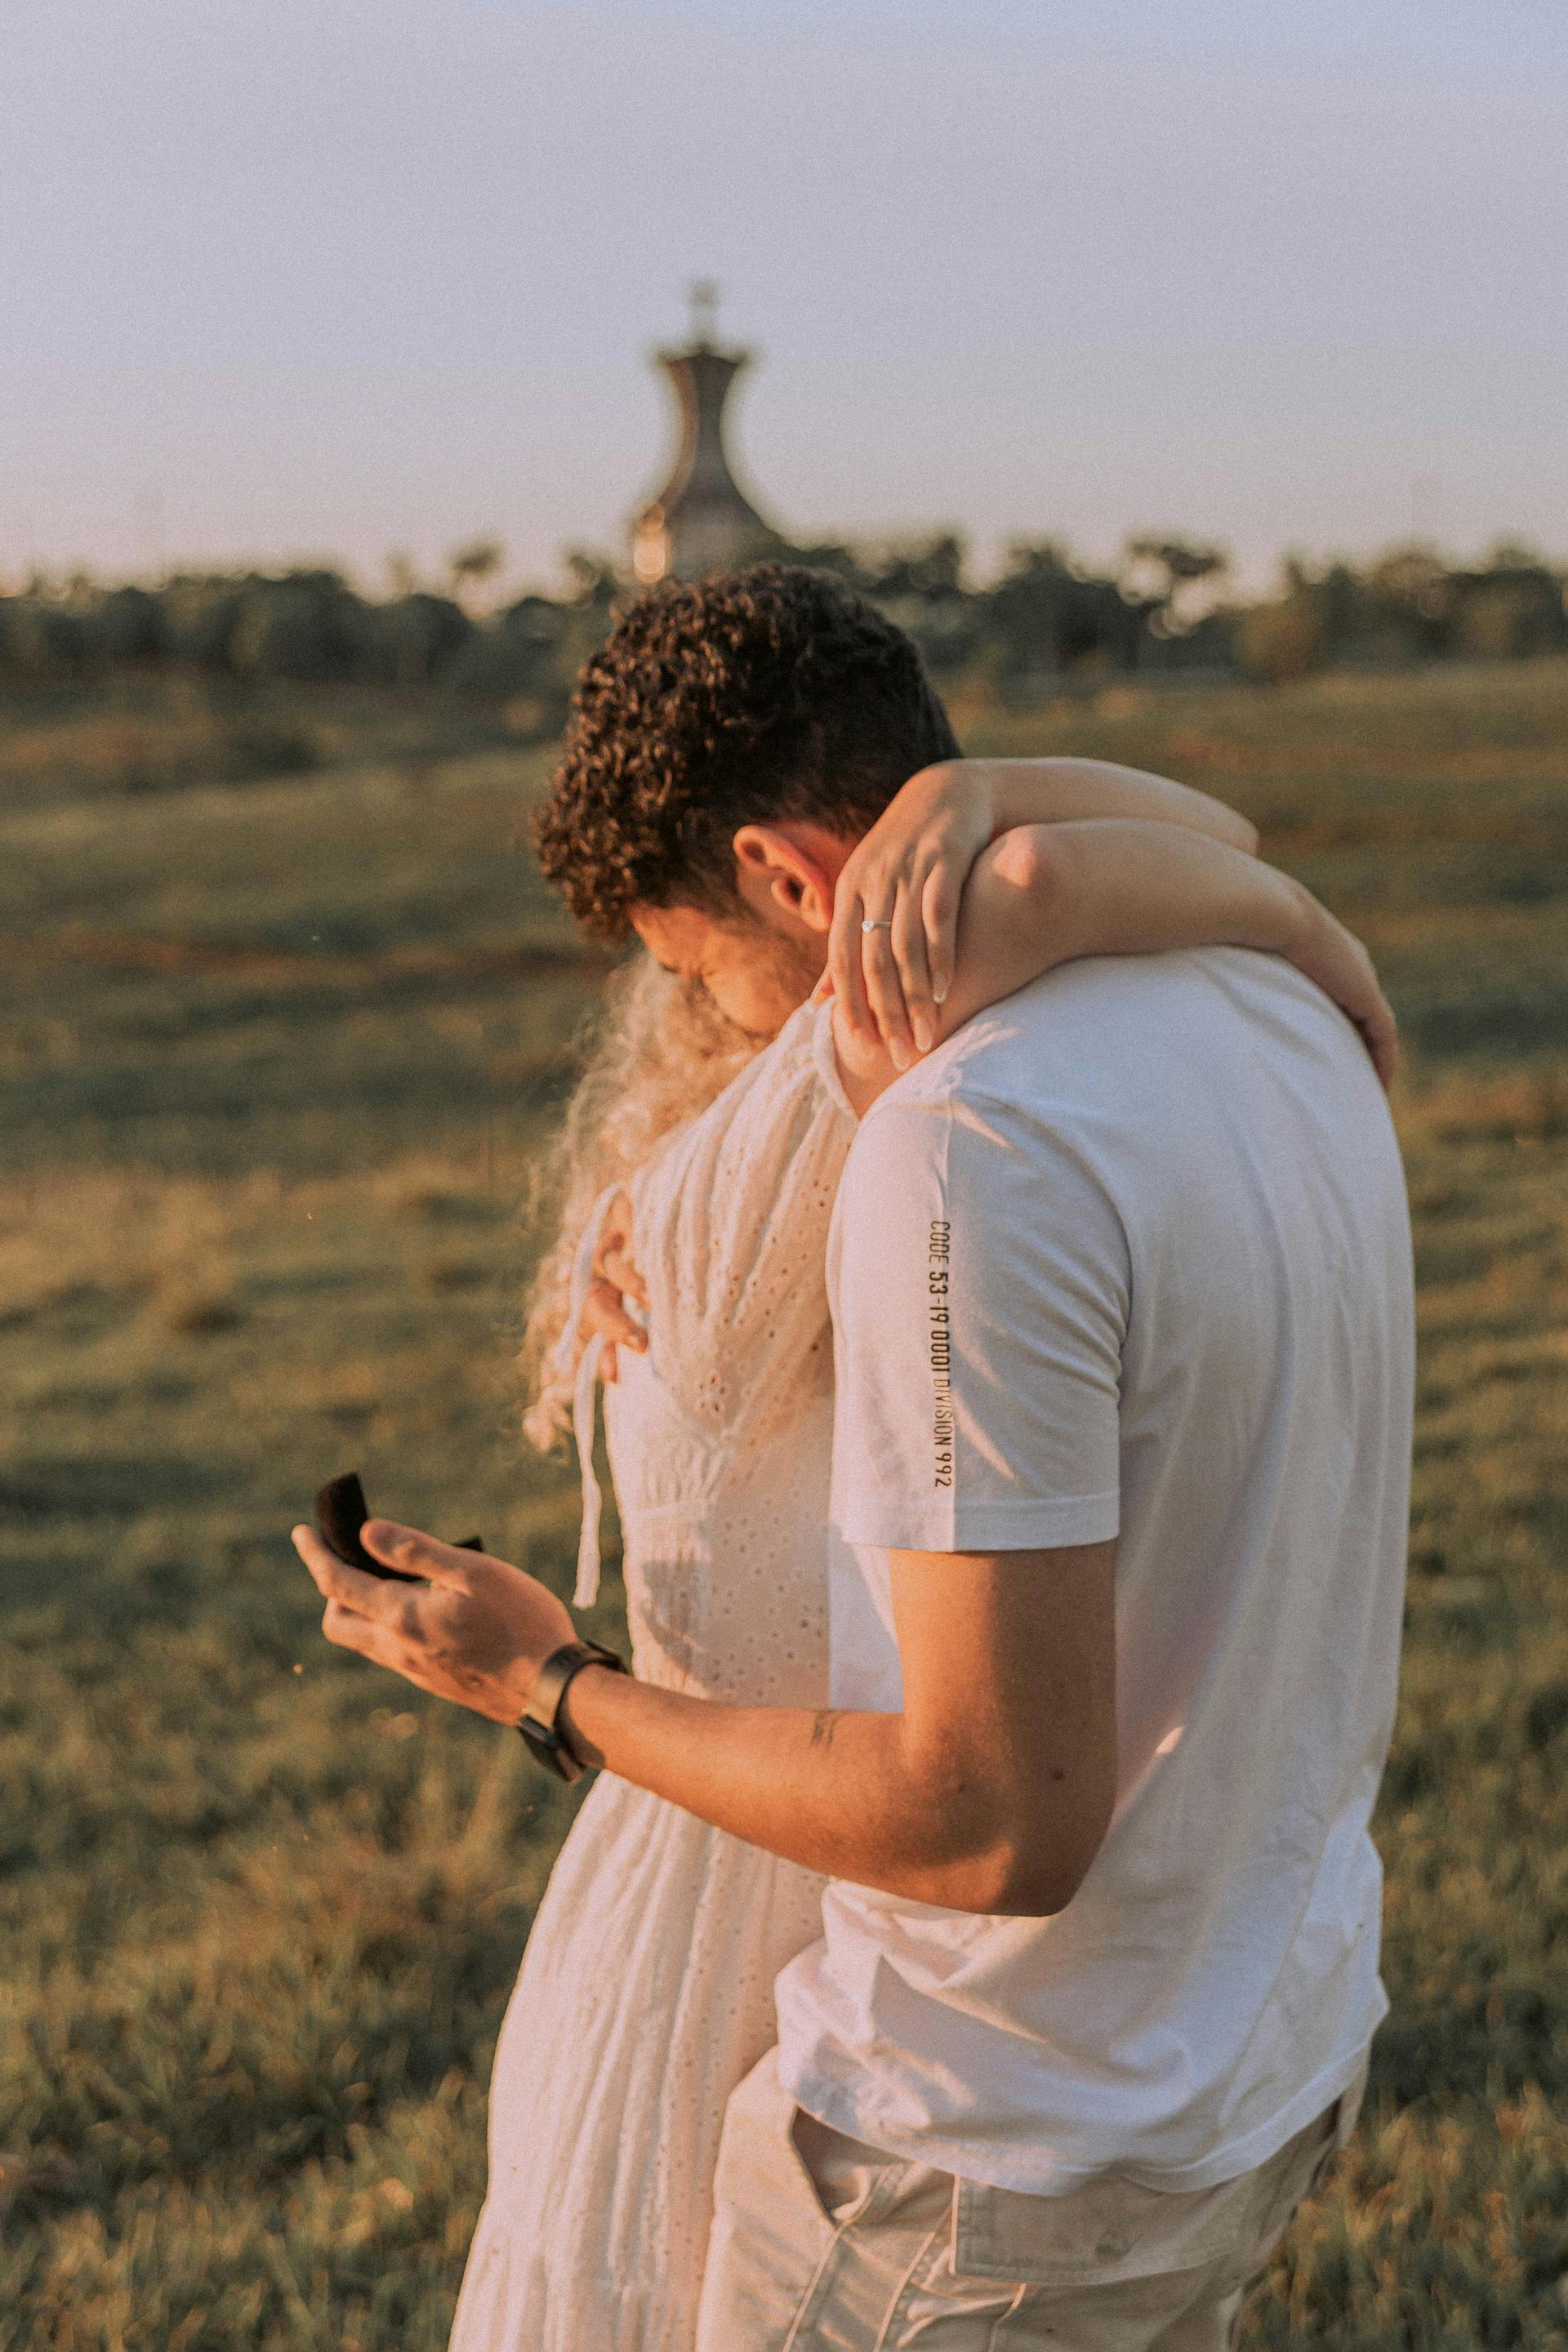 A woman hugging her lover after a romantic proposal | Source: Pexels